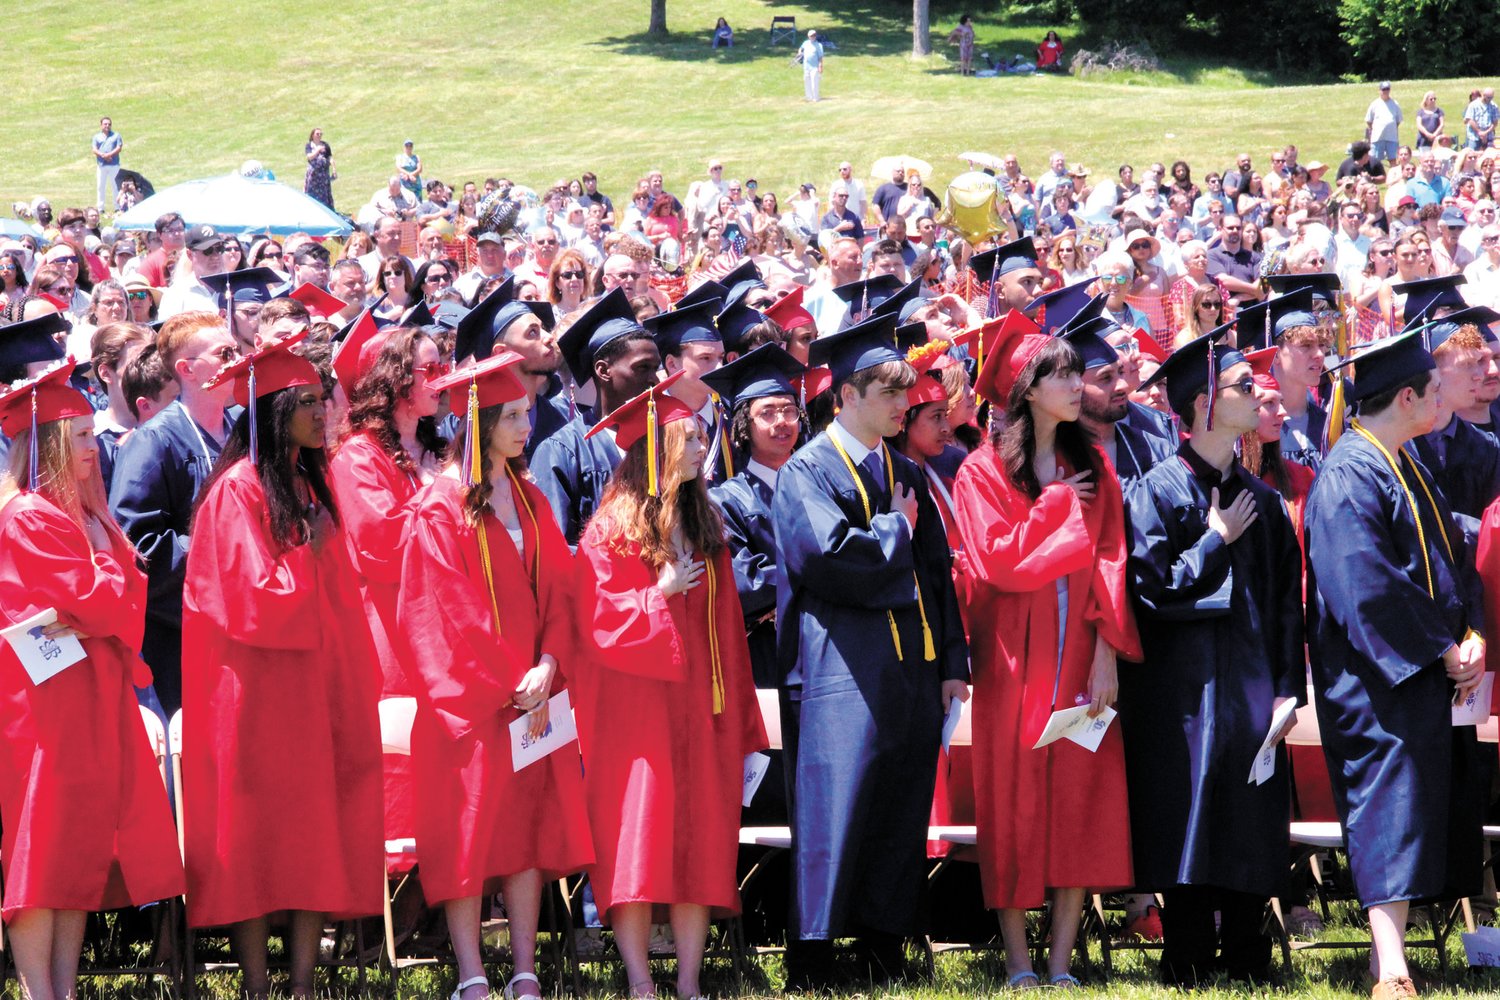 THEIR HEART IS IN IT: (left) Toll Gate students stand for the National Anthem  at the start of commencement exercises at the Aldrich Mansion on Warwick Neck.